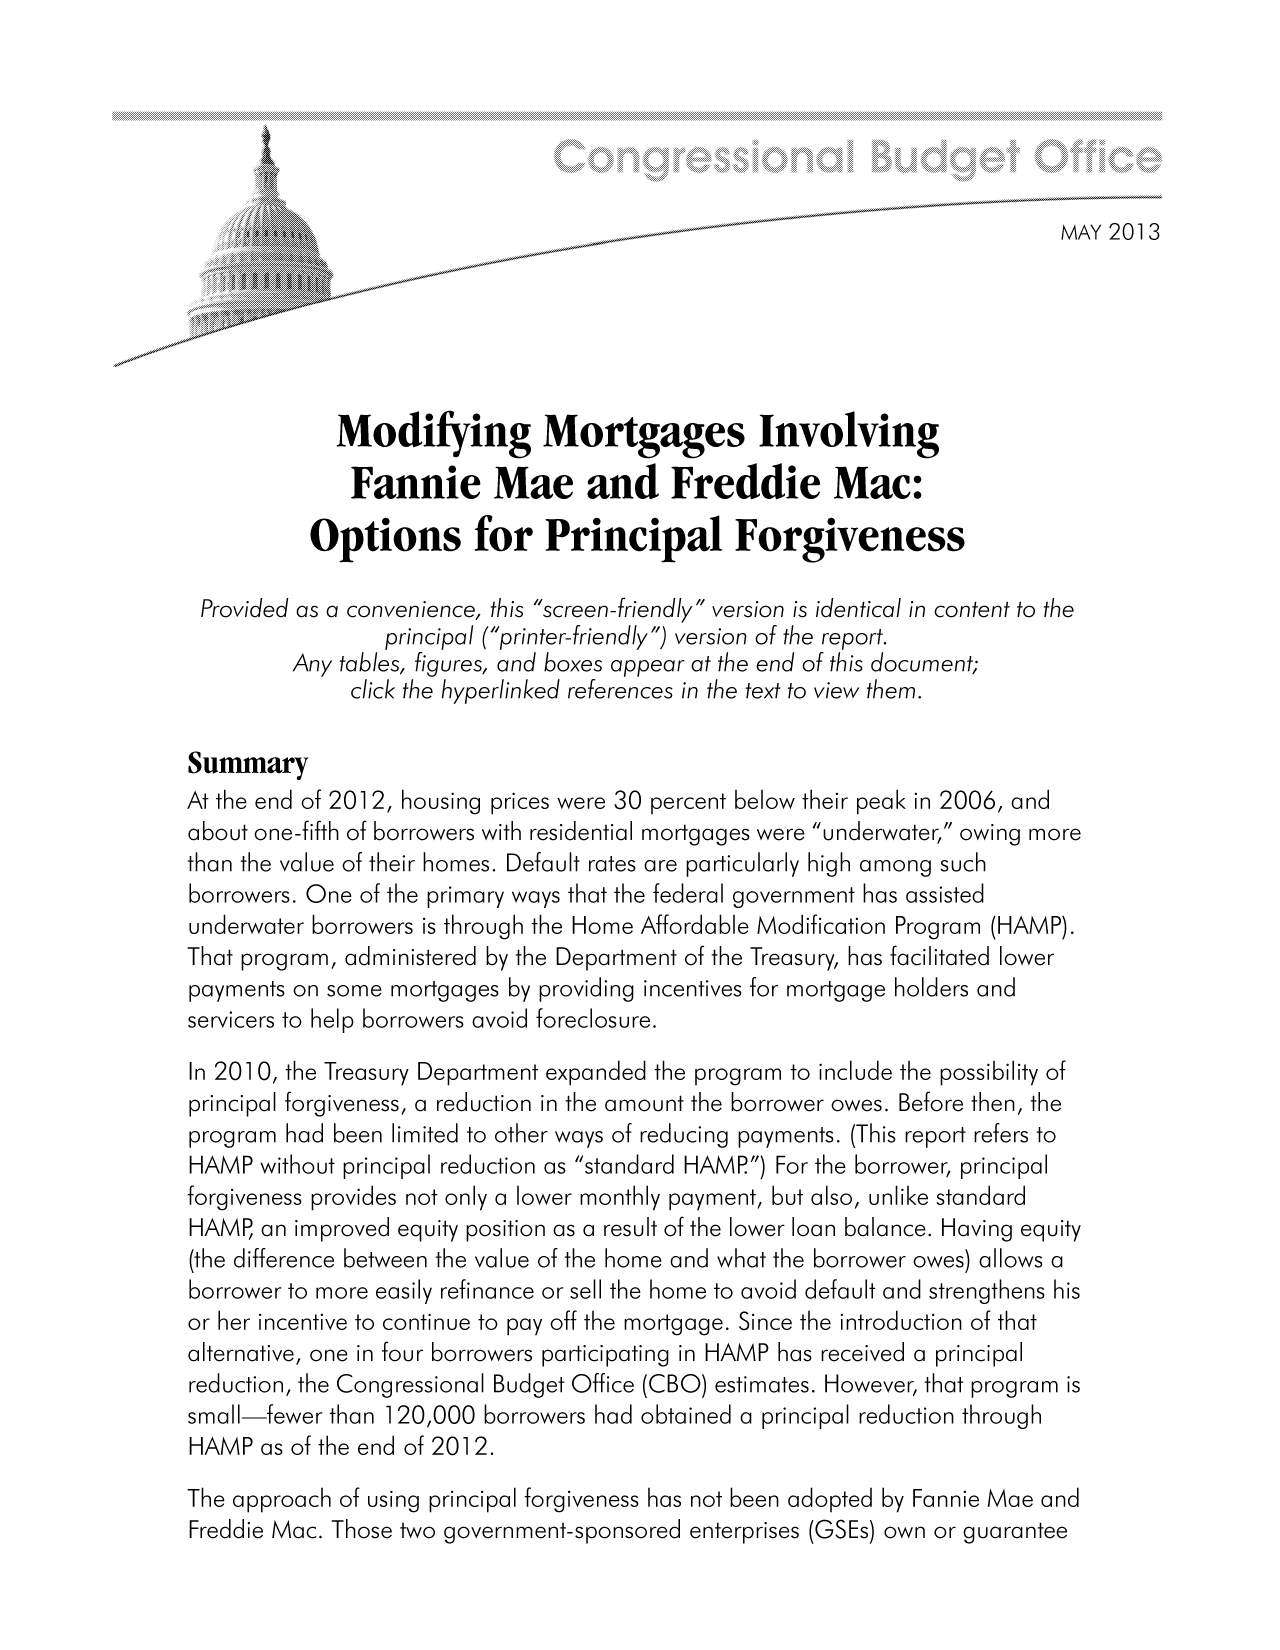 handle is hein.congrec/cbo11071 and id is 1 raw text is: 44                                               MAY 20]13
Modifying Mortgages Involving
Fannie Mae and Freddie Mac:
Options for Principal Forgiveness
Provided as a convenience, this screen-friendly version is identical in content to the
principal (printer-friendly) version of the report.
Any tables, figures, and boxes appear at the end of this document;
click the hyperlinked references in the text to view them.
Summary
At the end of 2012, housing prices were 30 percent below their peak in 2006, and
about one-fifth of borrowers with residential mortgages were underwater, owing more
than the value of their homes. Default rates are particularly high among such
borrowers. One of the primary ways that the federal government has assisted
underwater borrowers is through the Home Affordable Modification Program (HAMP).
That program, administered by the Department of the Treasury, has facilitated lower
payments on some mortgages by providing incentives for mortgage holders and
servicers to help borrowers avoid foreclosure.
In 2010, the Treasury Department expanded the program to include the possibility of
principal forgiveness, a reduction in the amount the borrower owes. Before then, the
program had been limited to other ways of reducing payments. (This report refers to
HAMP without principal reduction as standard HAMP) For the borrower, principal
forgiveness provides not only a lower monthly payment, but also, unlike standard
HAMP, an improved equity position as a result of the lower loan balance. Having equity
(the difference between the value of the home and what the borrower owes) allows a
borrower to more easily refinance or sell the home to avoid default and strengthens his
or her incentive to continue to pay off the mortgage. Since the introduction of that
alternative, one in four borrowers participating in HAMP has received a principal
reduction, the Congressional Budget Office (CBO) estimates. However, that program is
small-fewer than ]120,000 borrowers had obtained a principal reduction through
HAMP as of the end of 20]12.
The approach of using principal forgiveness has not been adopted by Fannie Mae and
Freddie Mac. Those two government-sponsored enterprises (OS Es) own or guarantee


